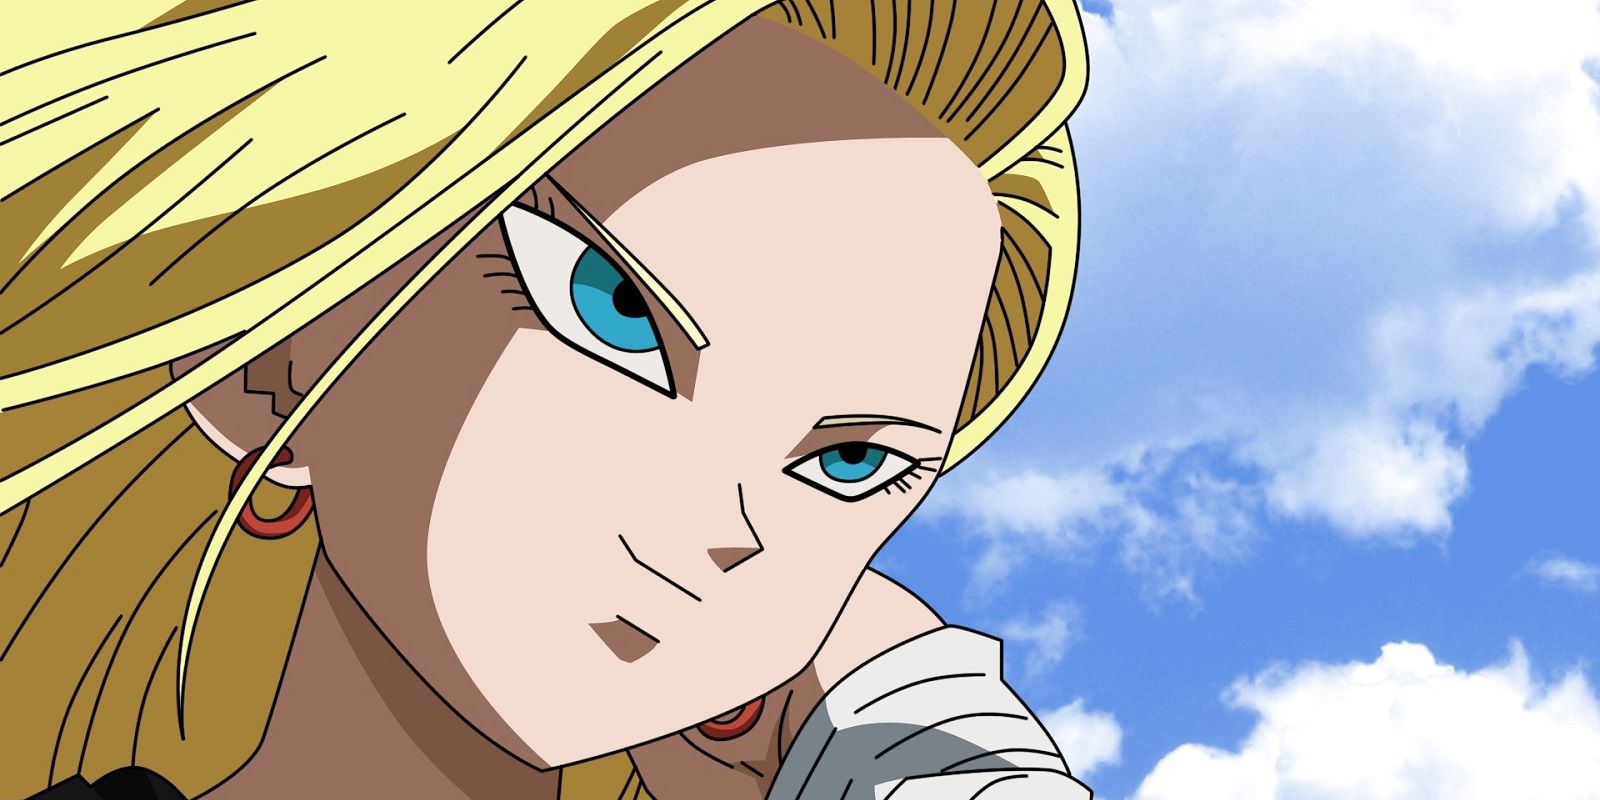 Krillin's wife, Android 18, in the Dragon Ball franchise